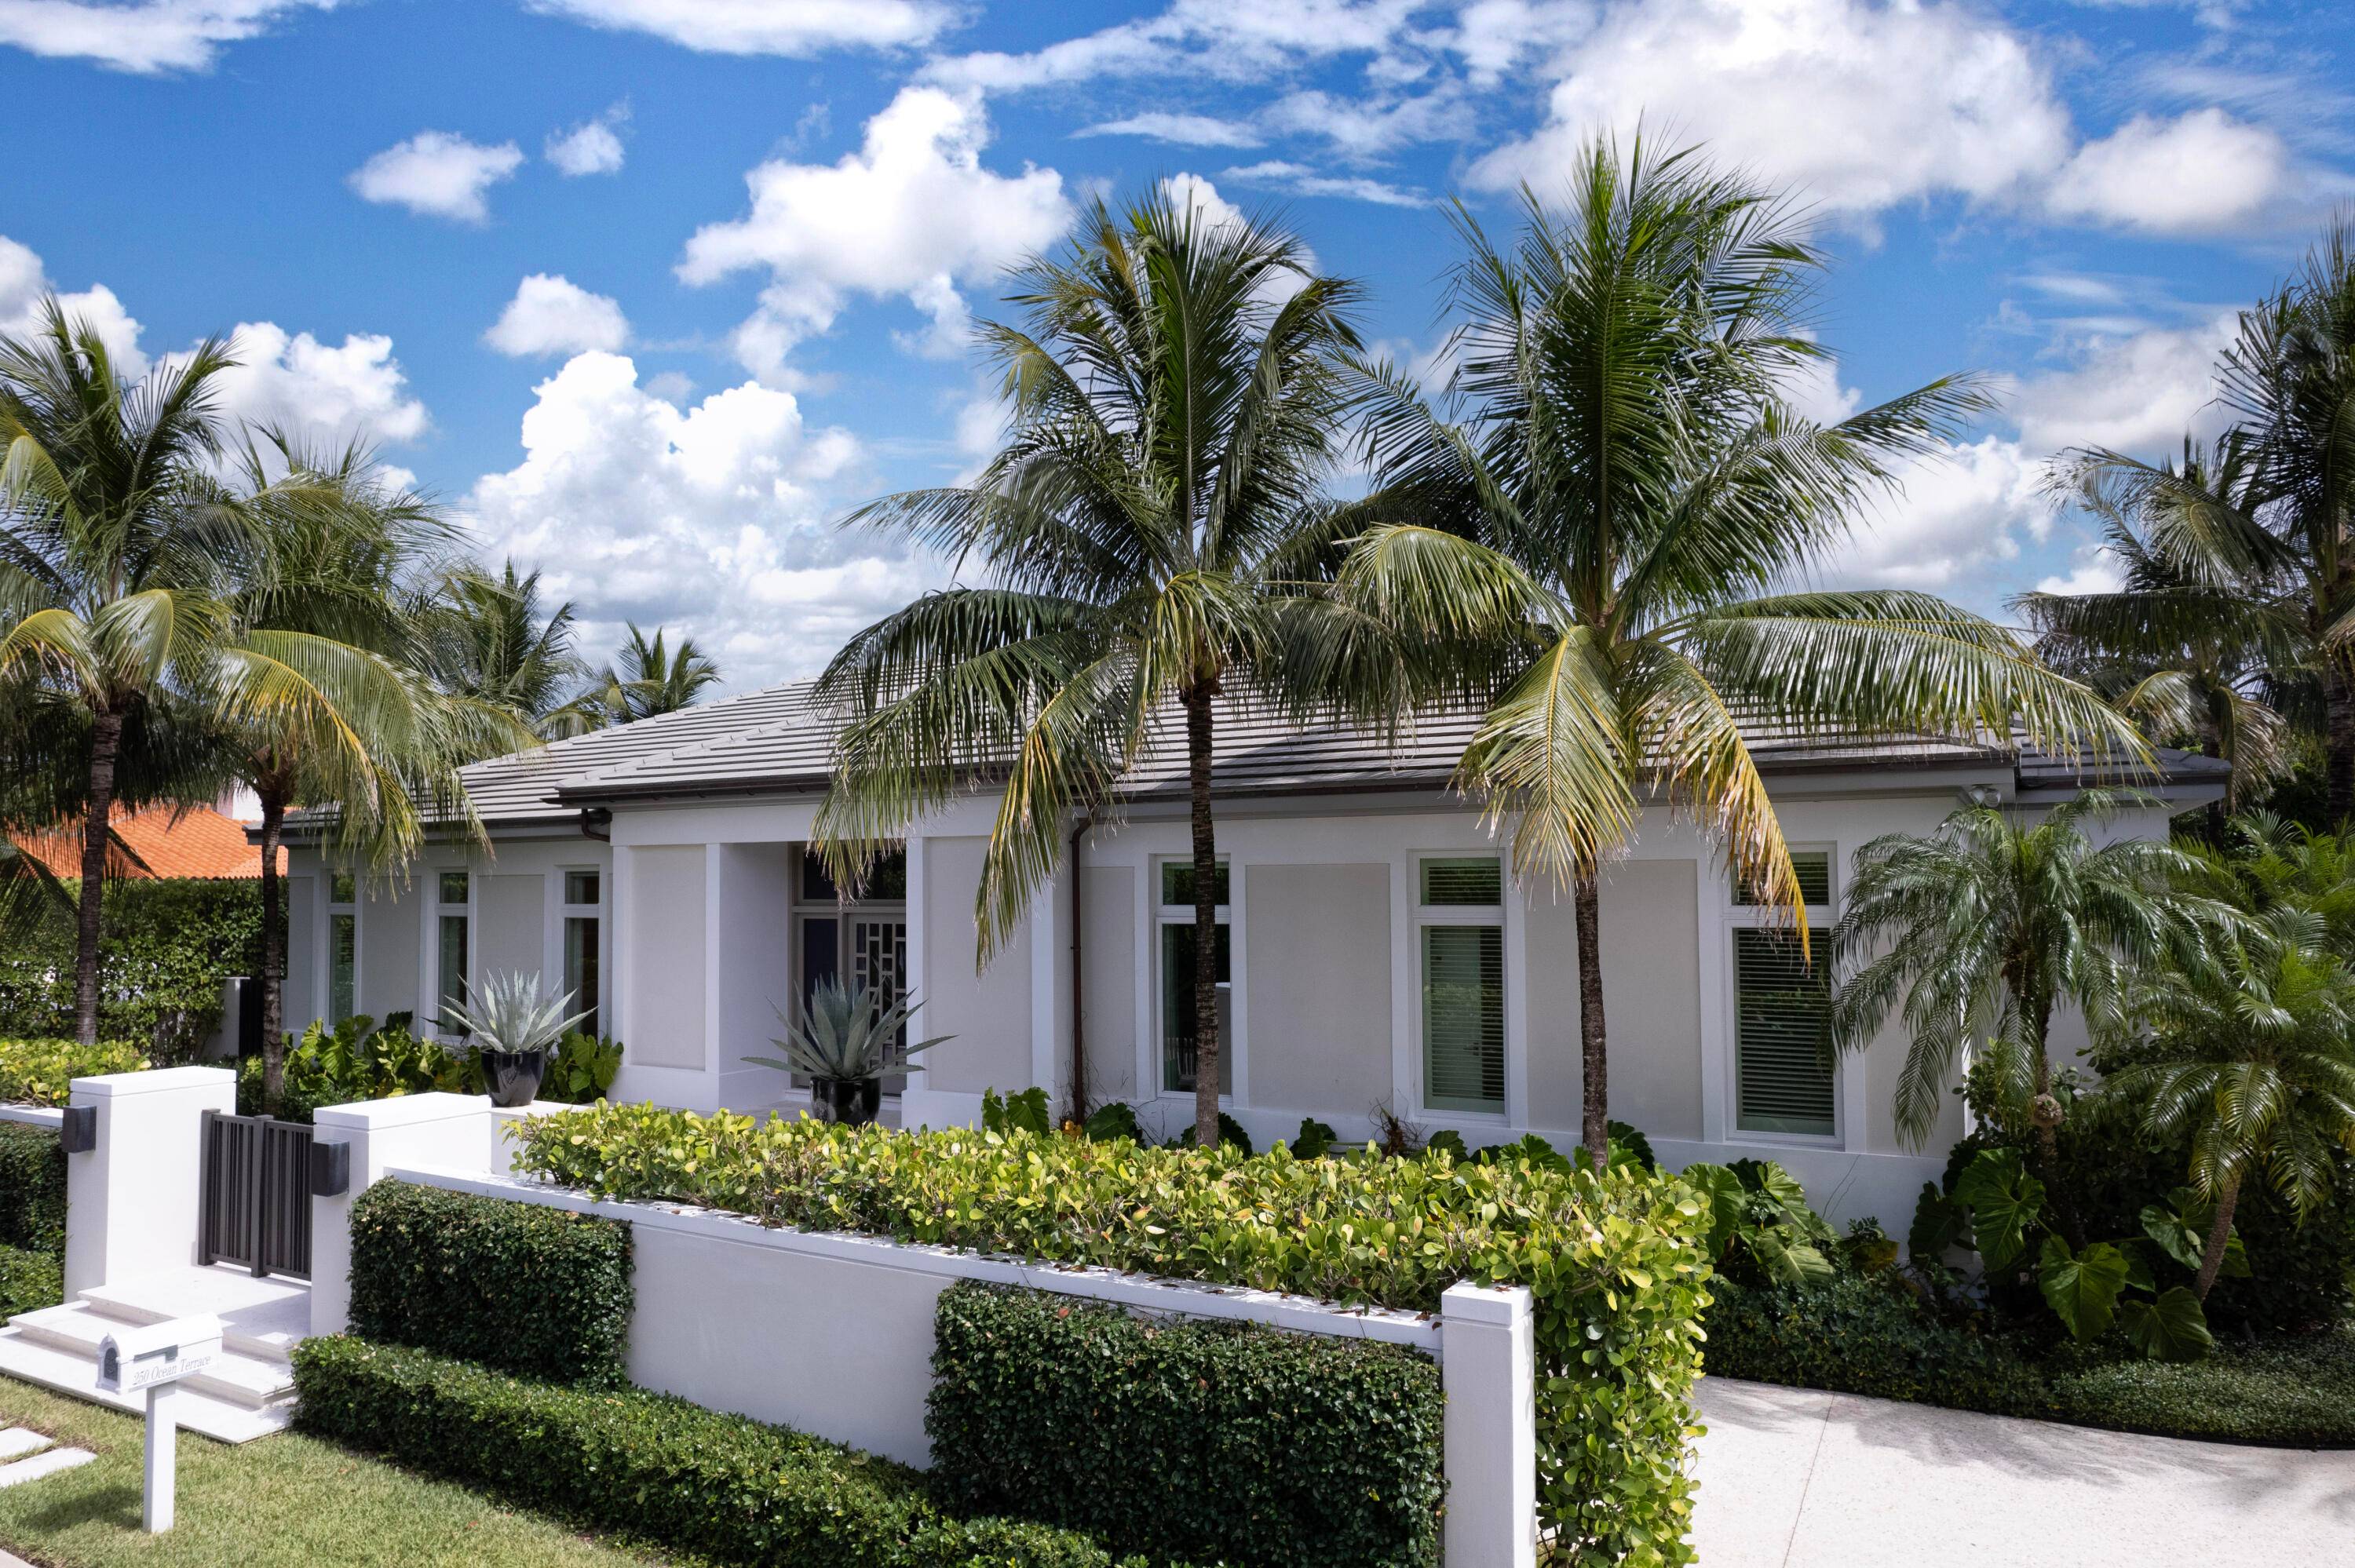 Located on Palm Beach's quiet and serene North End and custom built in 2018, this single story modern island home is nothing short of stunning.